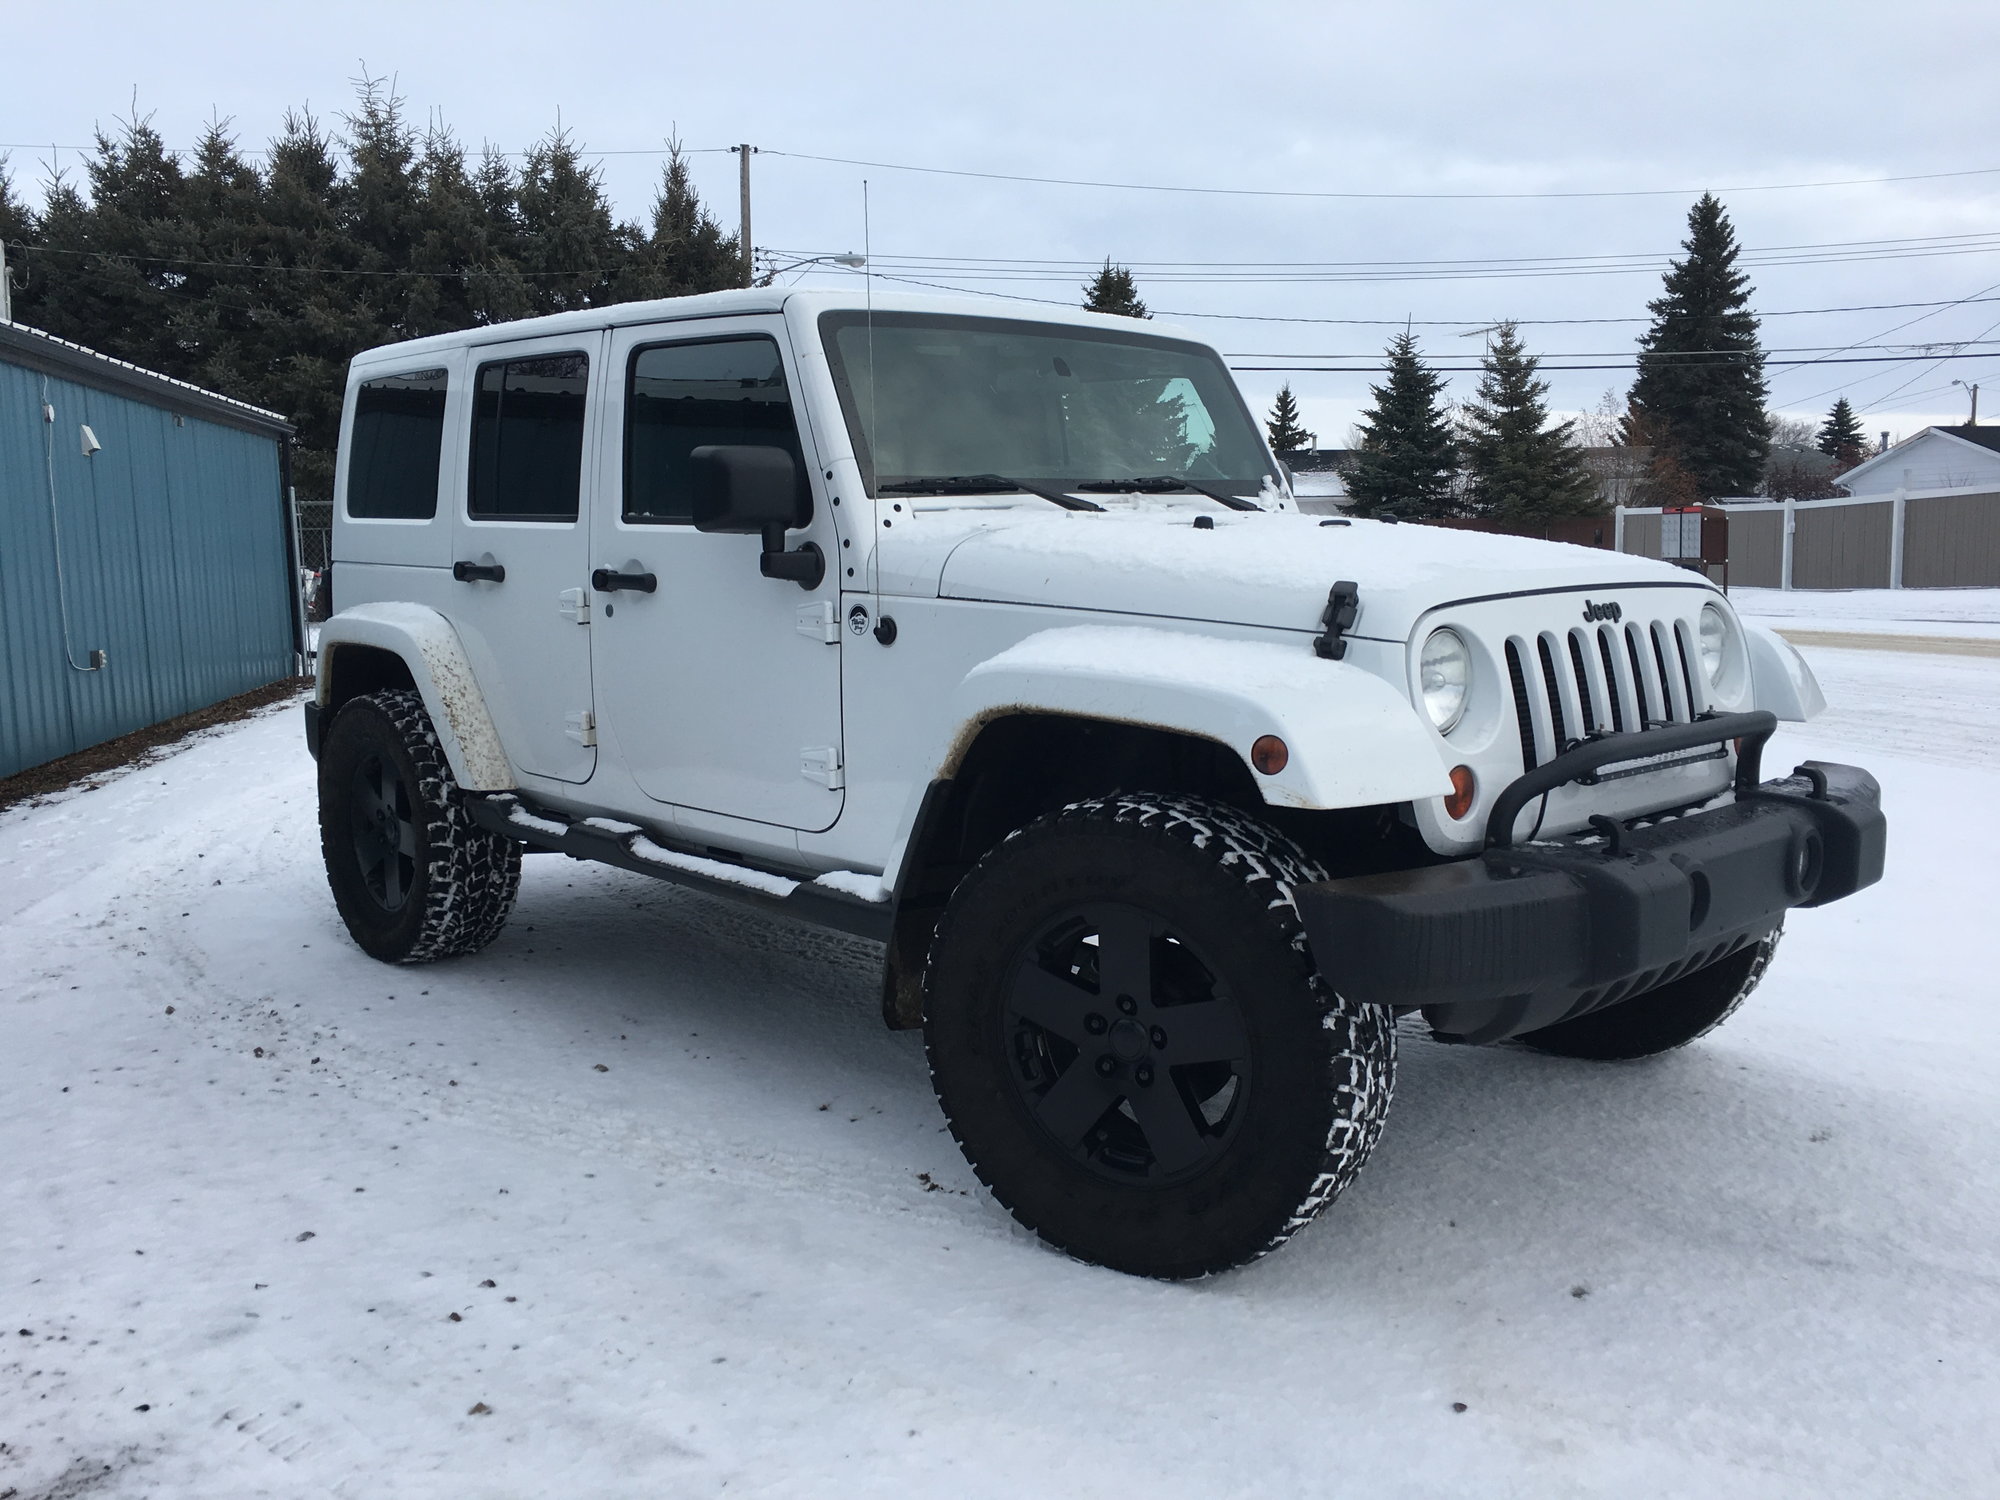 18 inch stock rims, largest tire size  - The top destination  for Jeep JK and JL Wrangler news, rumors, and discussion